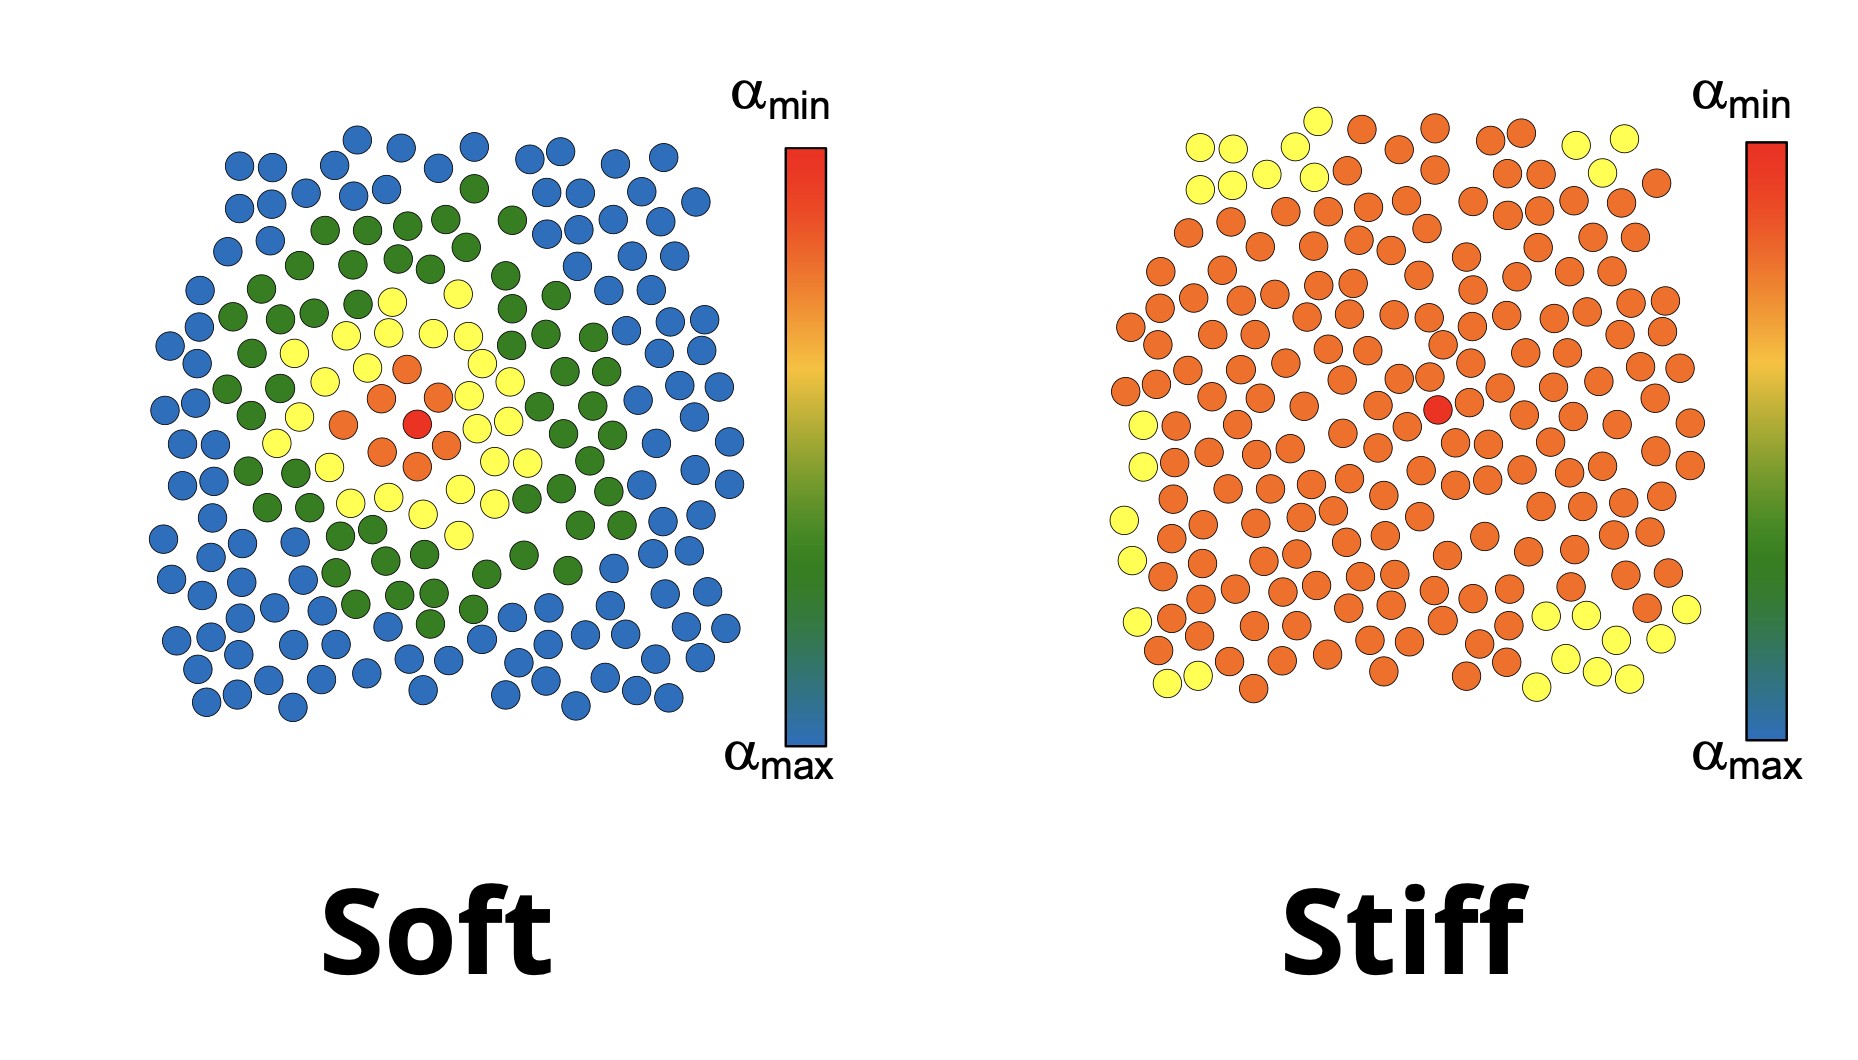 A comparison of surrounding cells' reaction to softened and stiffened cells in within epithelial monolayers.